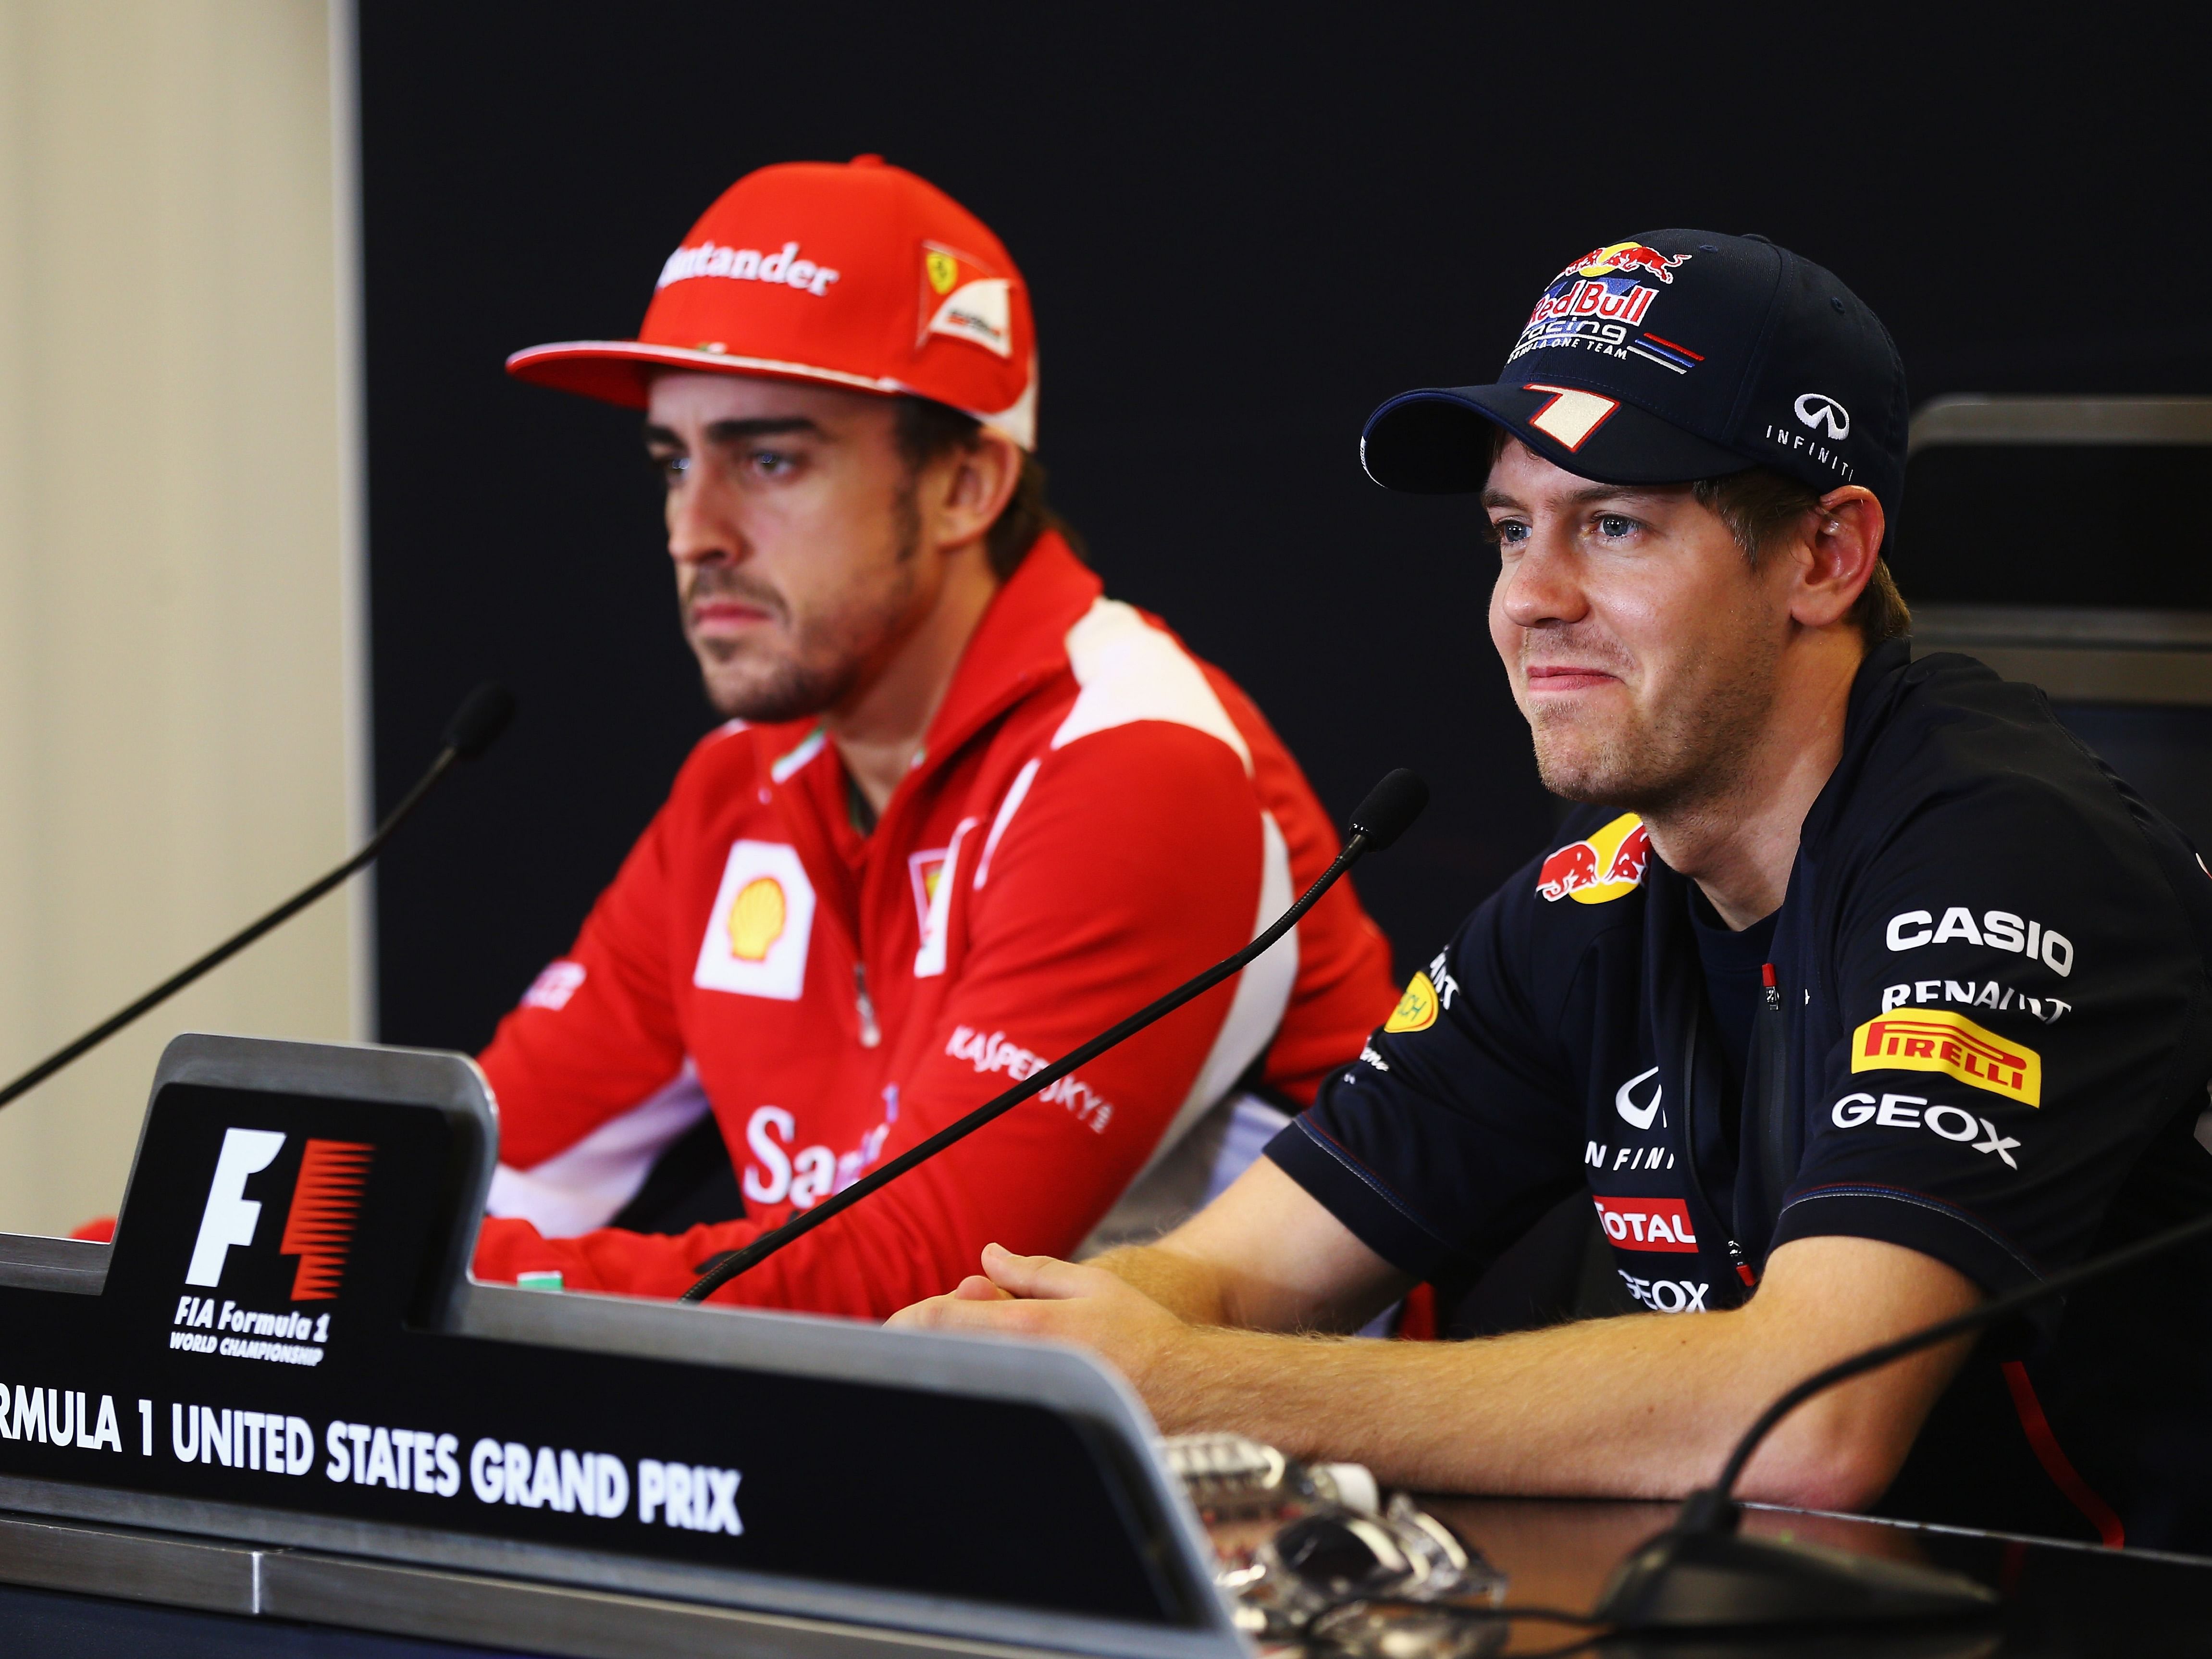 Sebastian Vettel (R) and Fernando Alonso (L) attend the drivers press conference during previews to the 2012 F1 United States Grand Prix. (Photo by Paul Gilham/Getty Images)